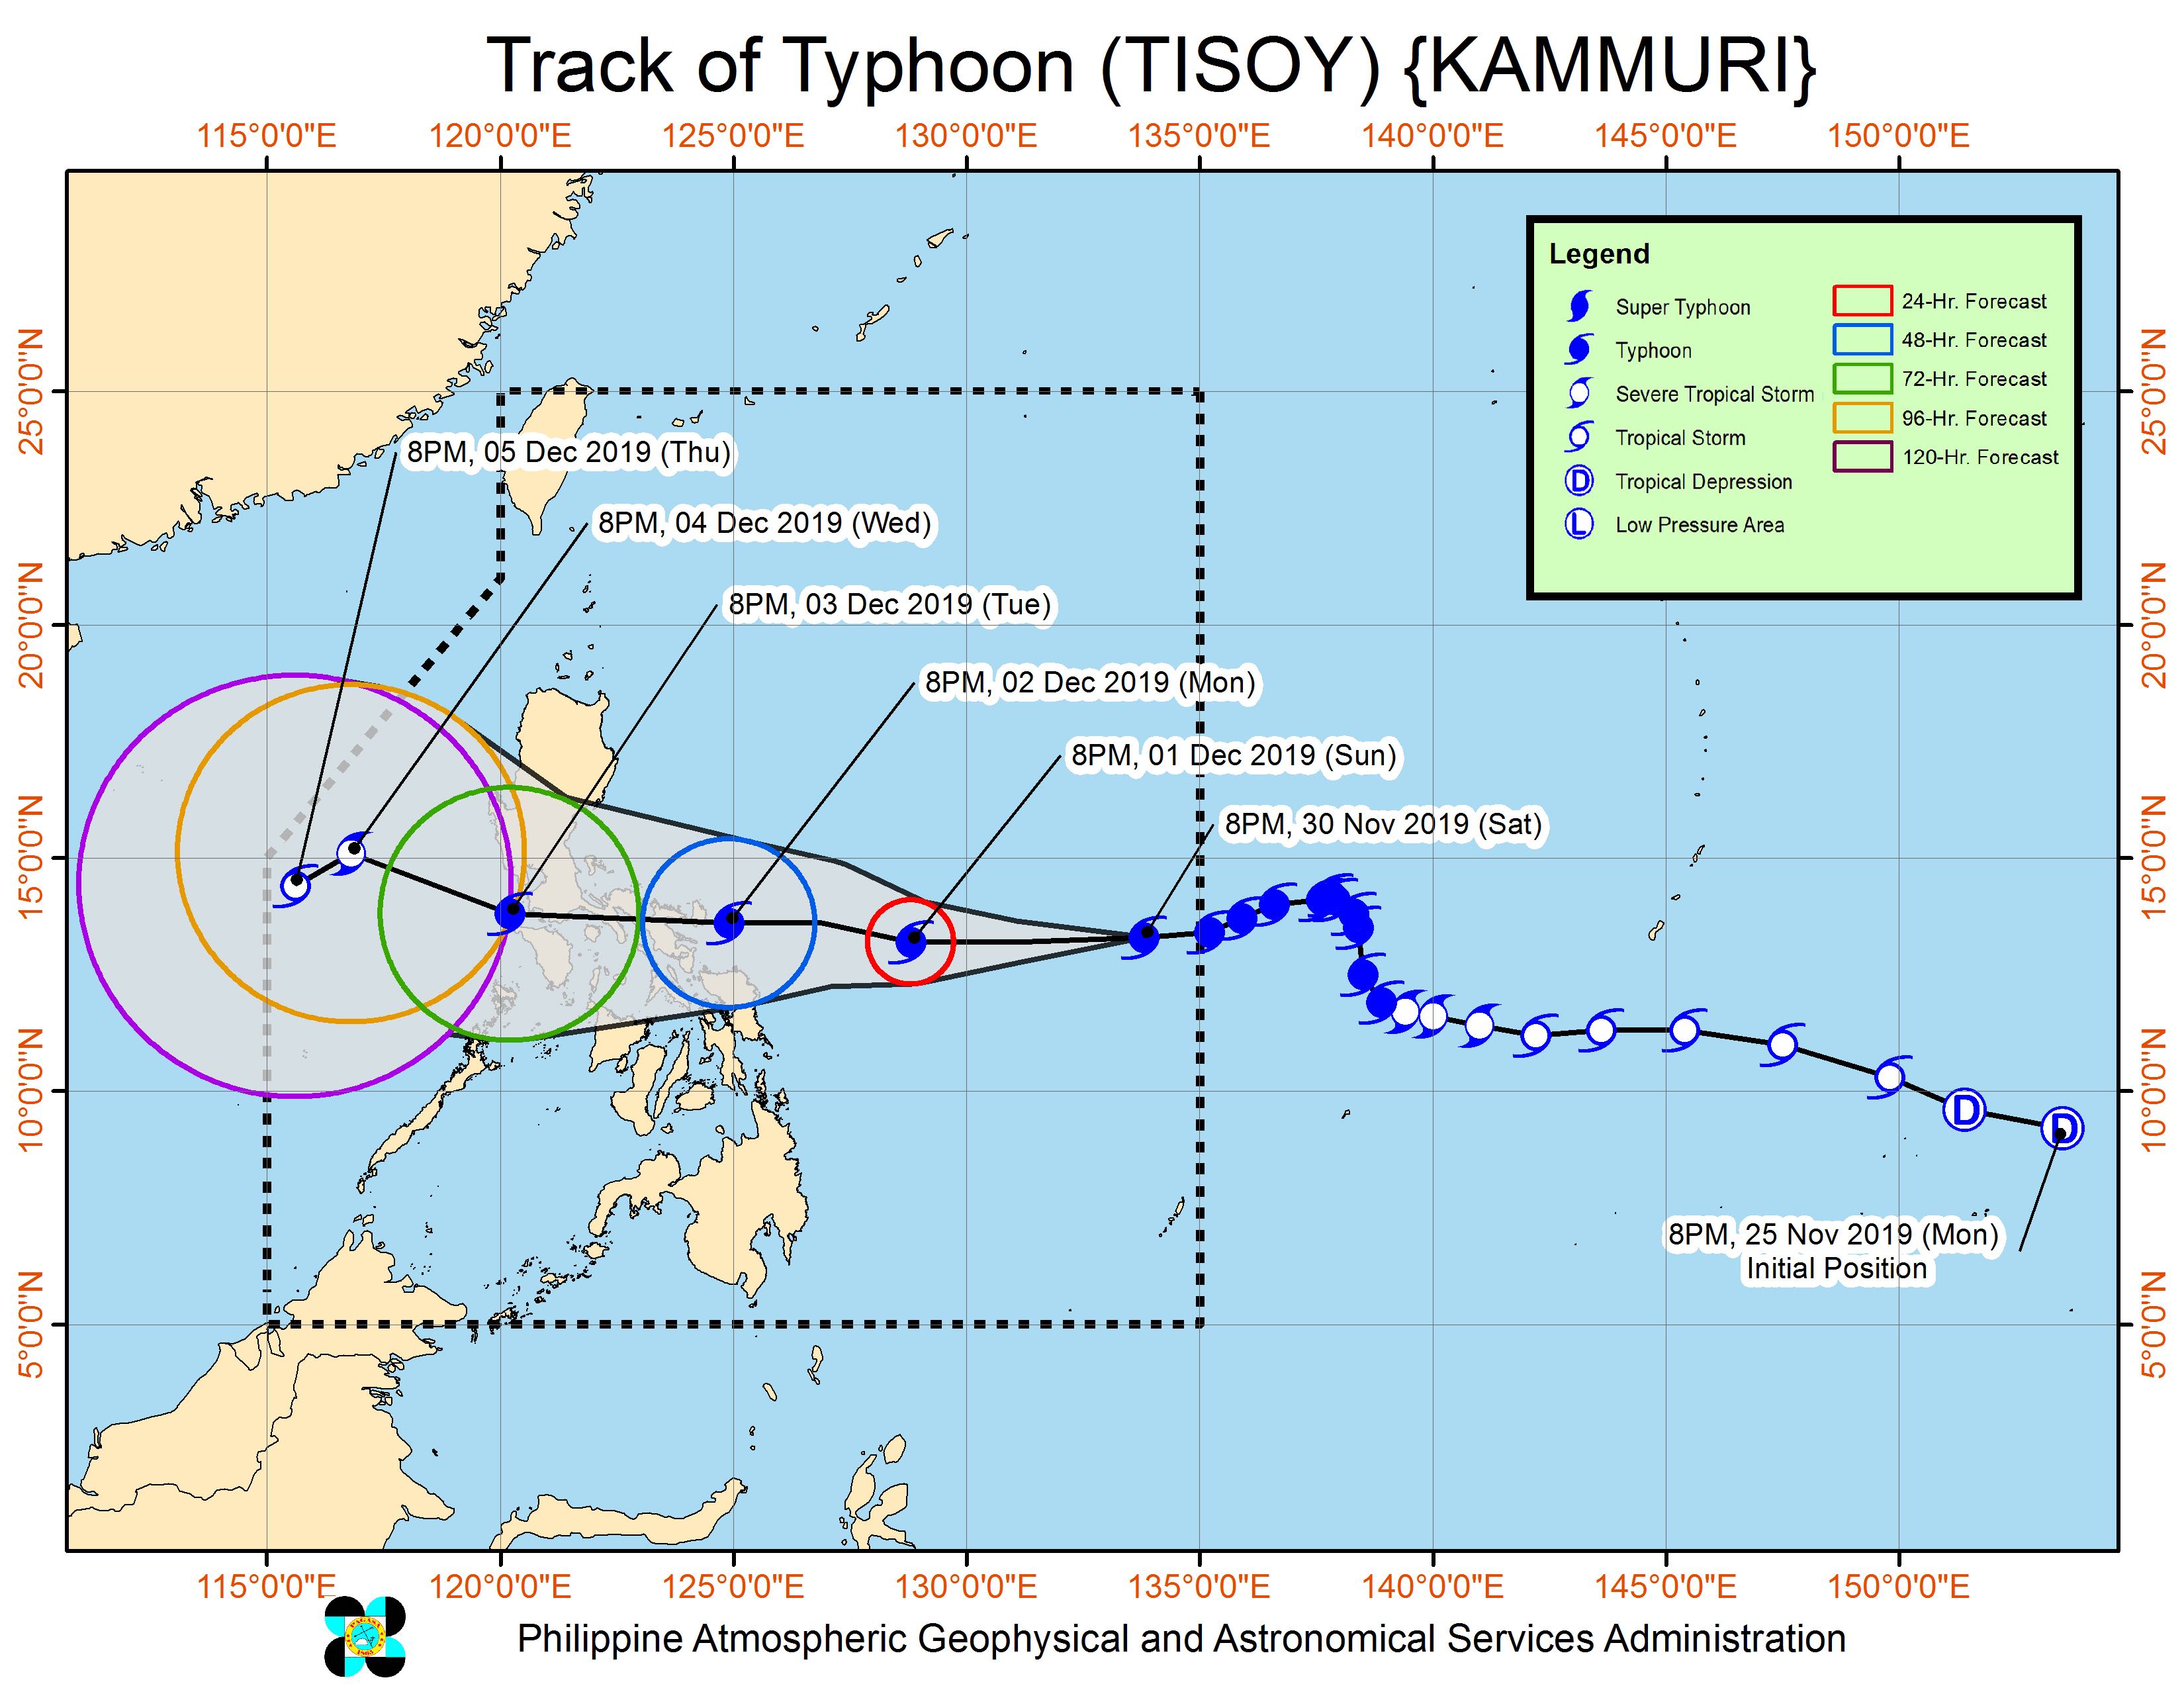 Forecast track of Typhoon Tisoy (Kammuri) as of November 30, 2019, 11 pm. Image from PAGASA 